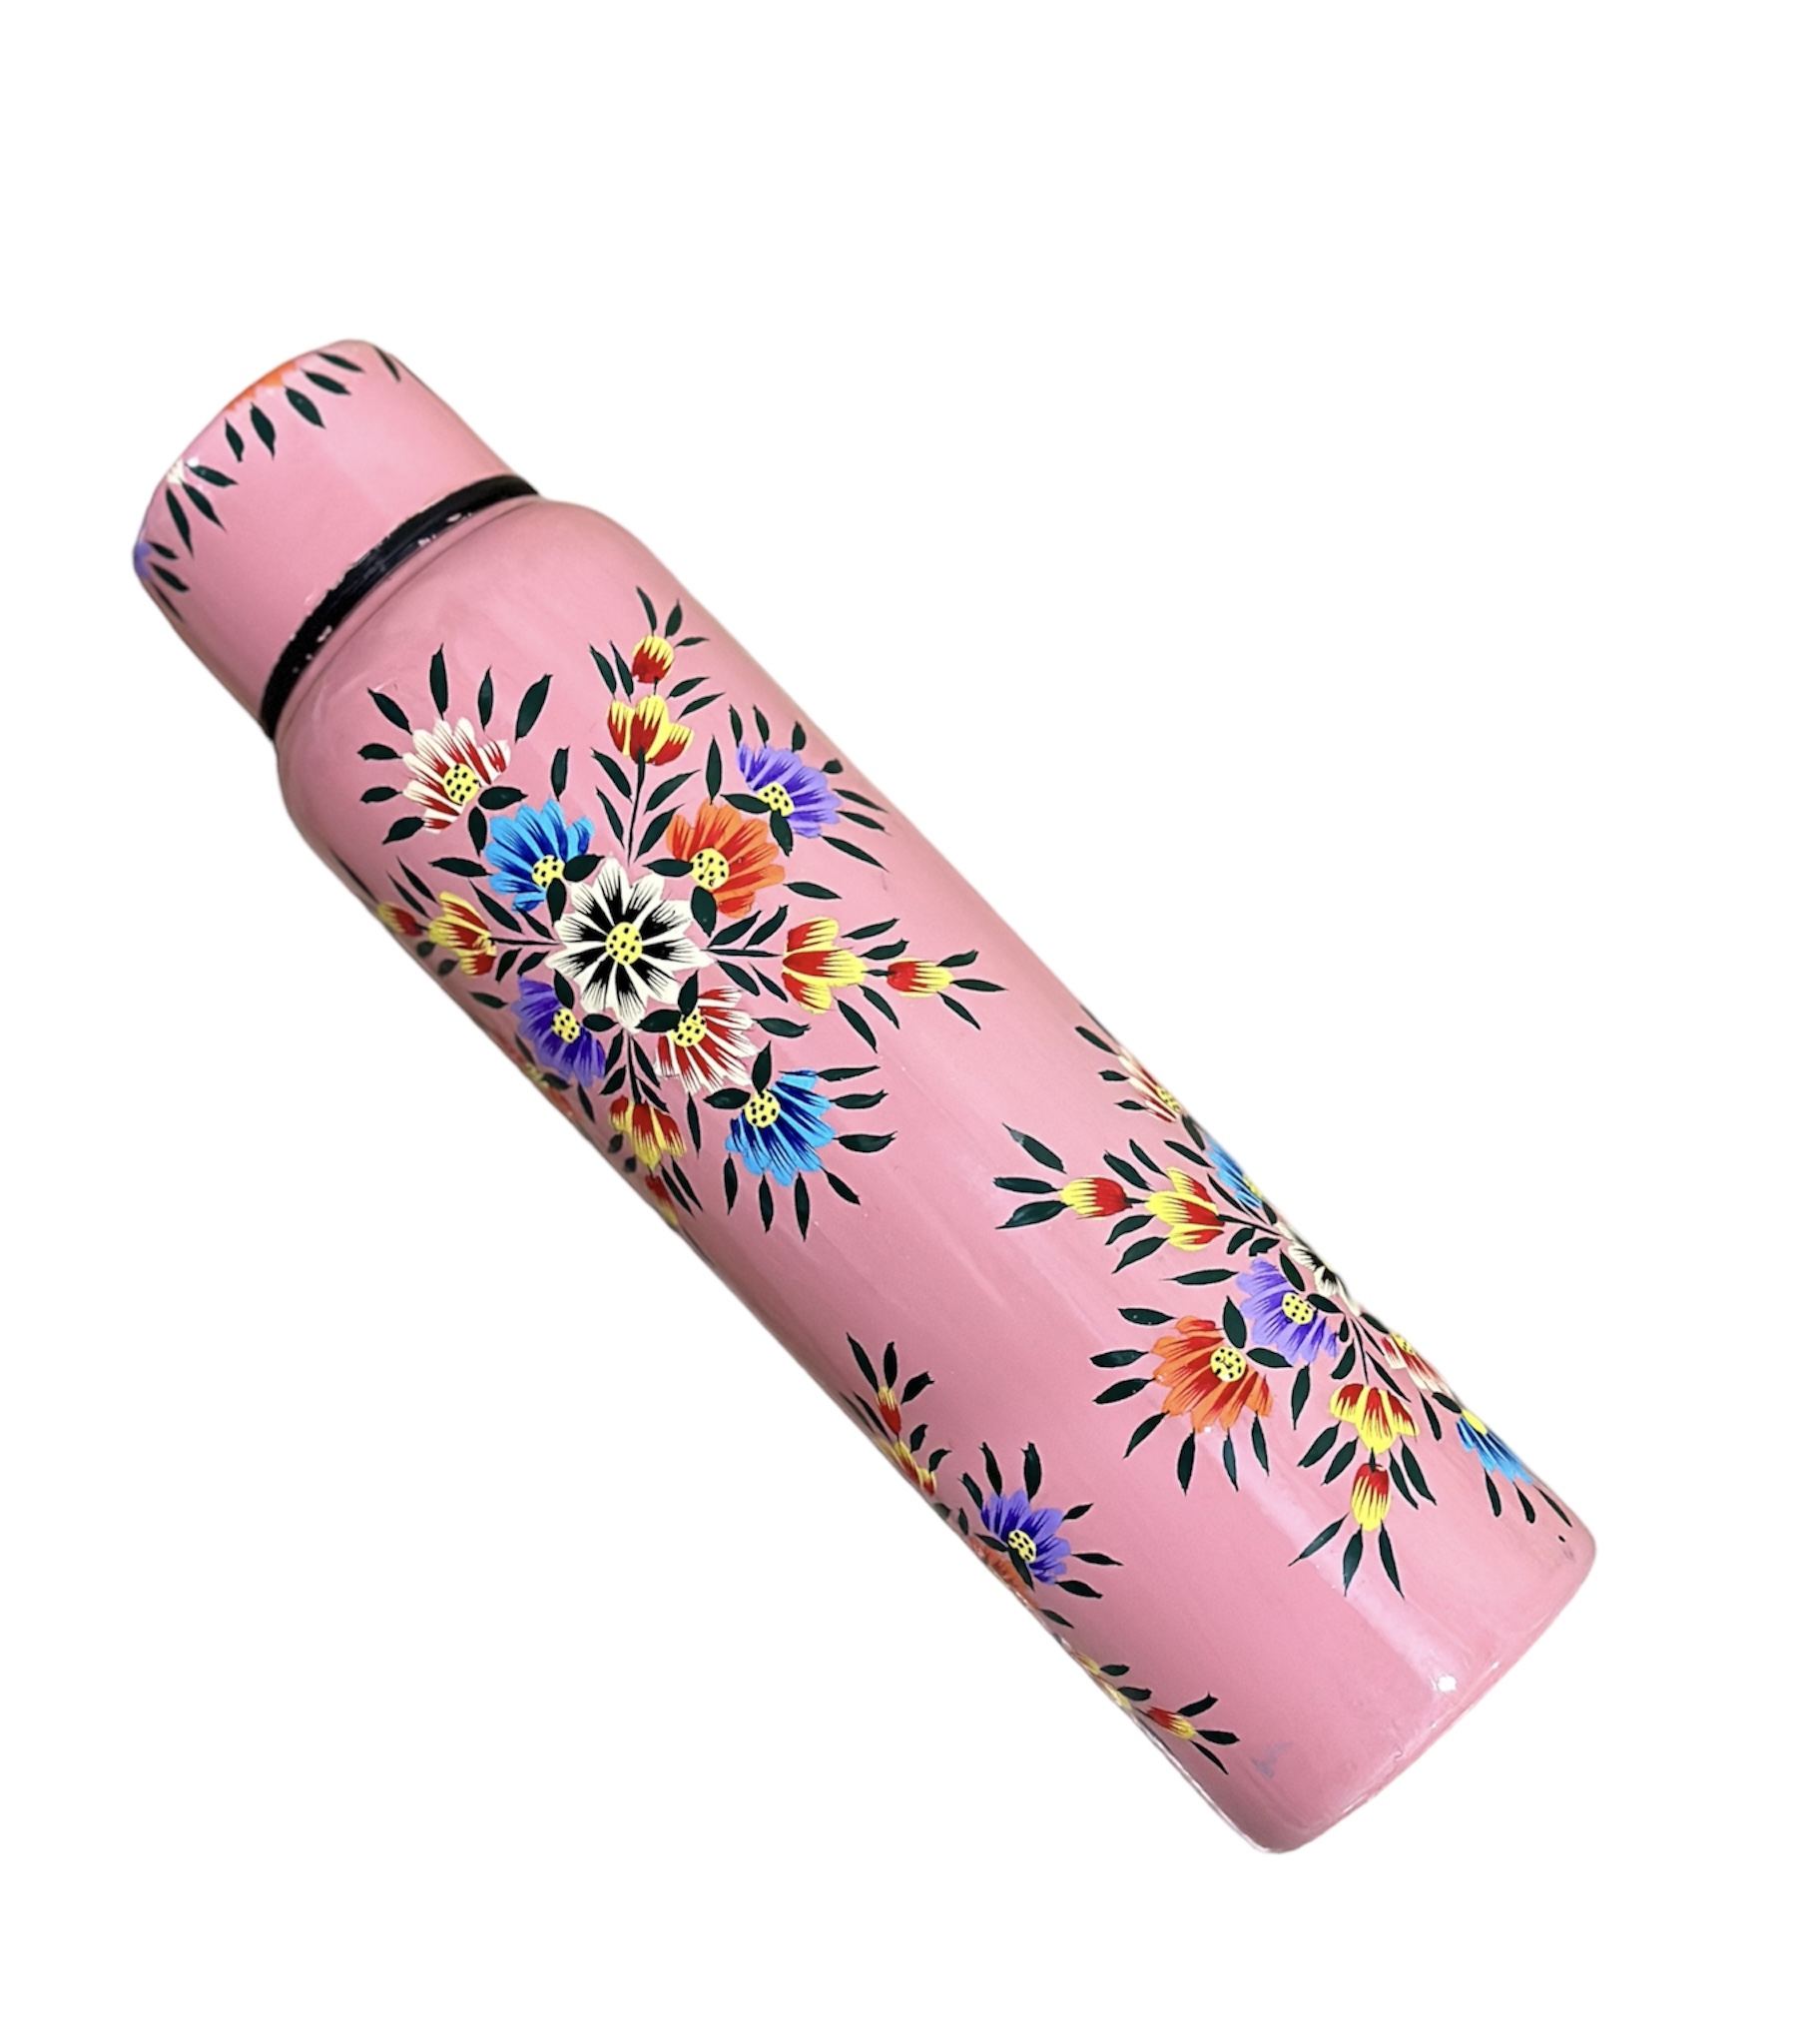 Hand painted Water Bottles, Stainless steel water bottle hand painted with lead free colors, hand painted thermos flask, boho picnic bottles